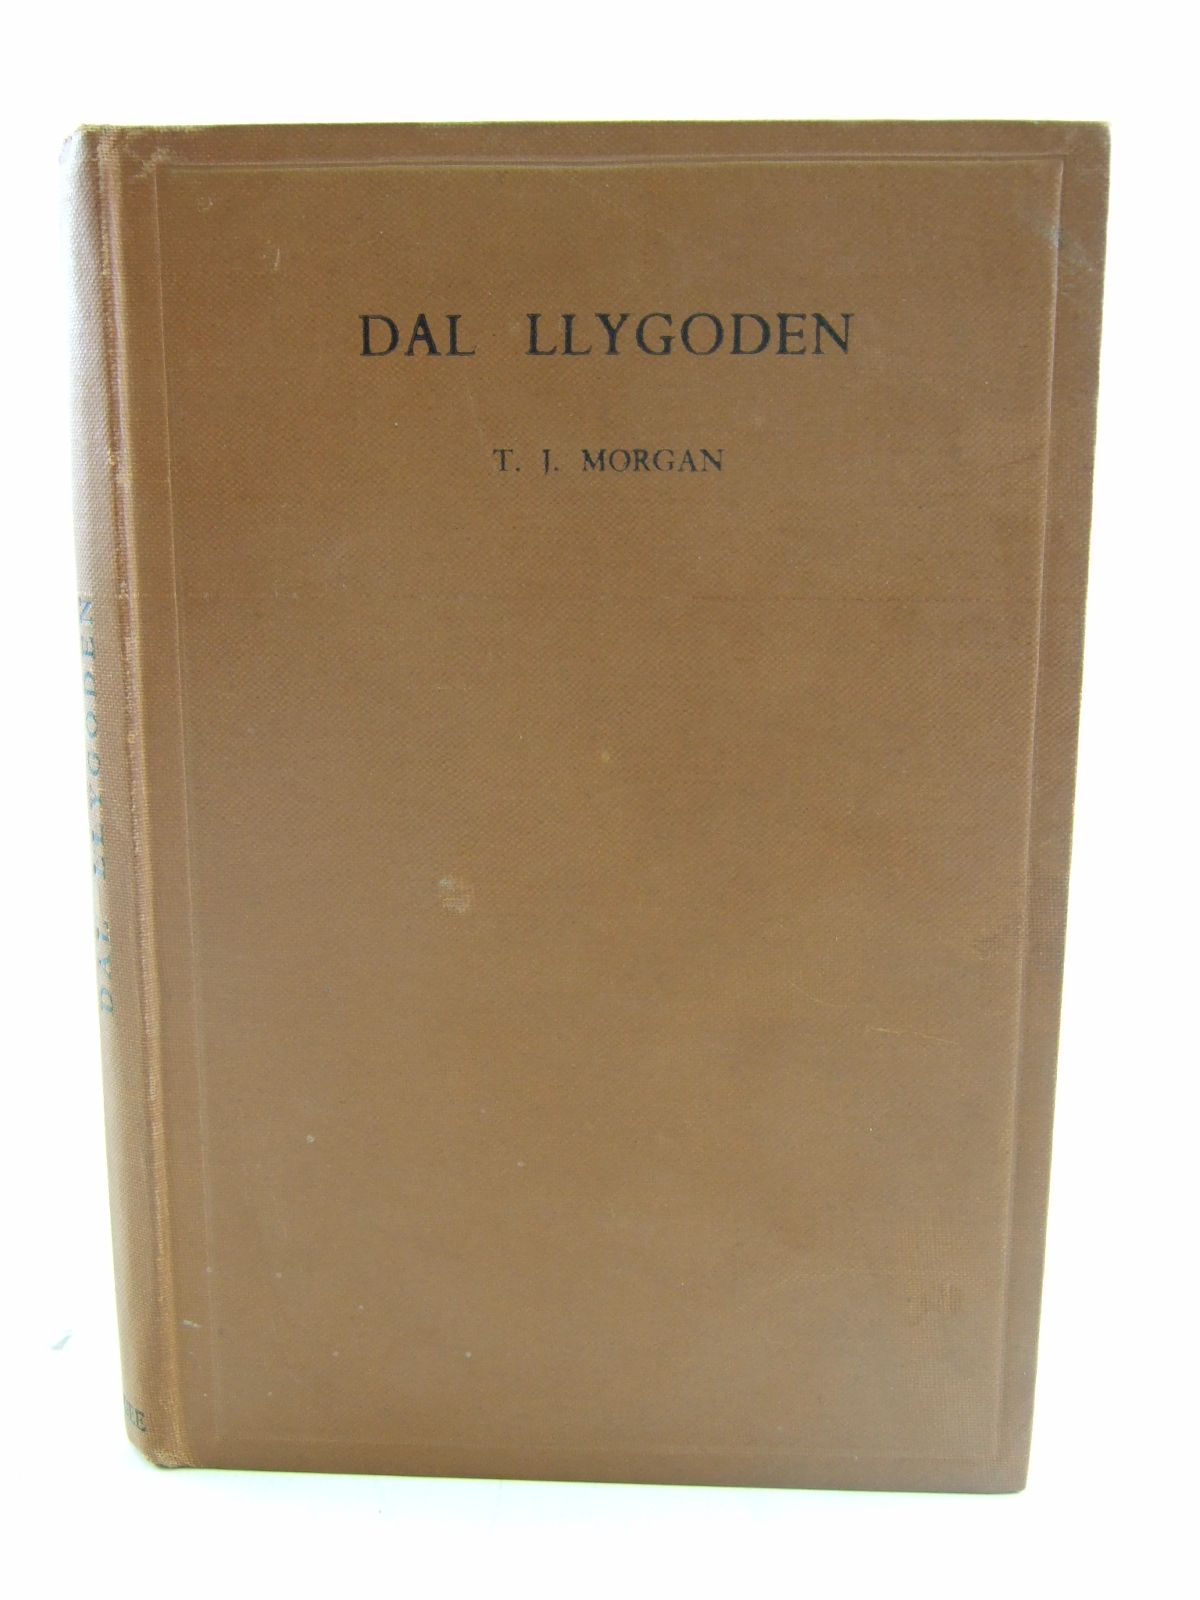 Photo of DAL LLYGODEN AC YSGRIFAU ERAILL written by Morgan, T.J. published by Gwasg Gee (STOCK CODE: 1806920)  for sale by Stella & Rose's Books